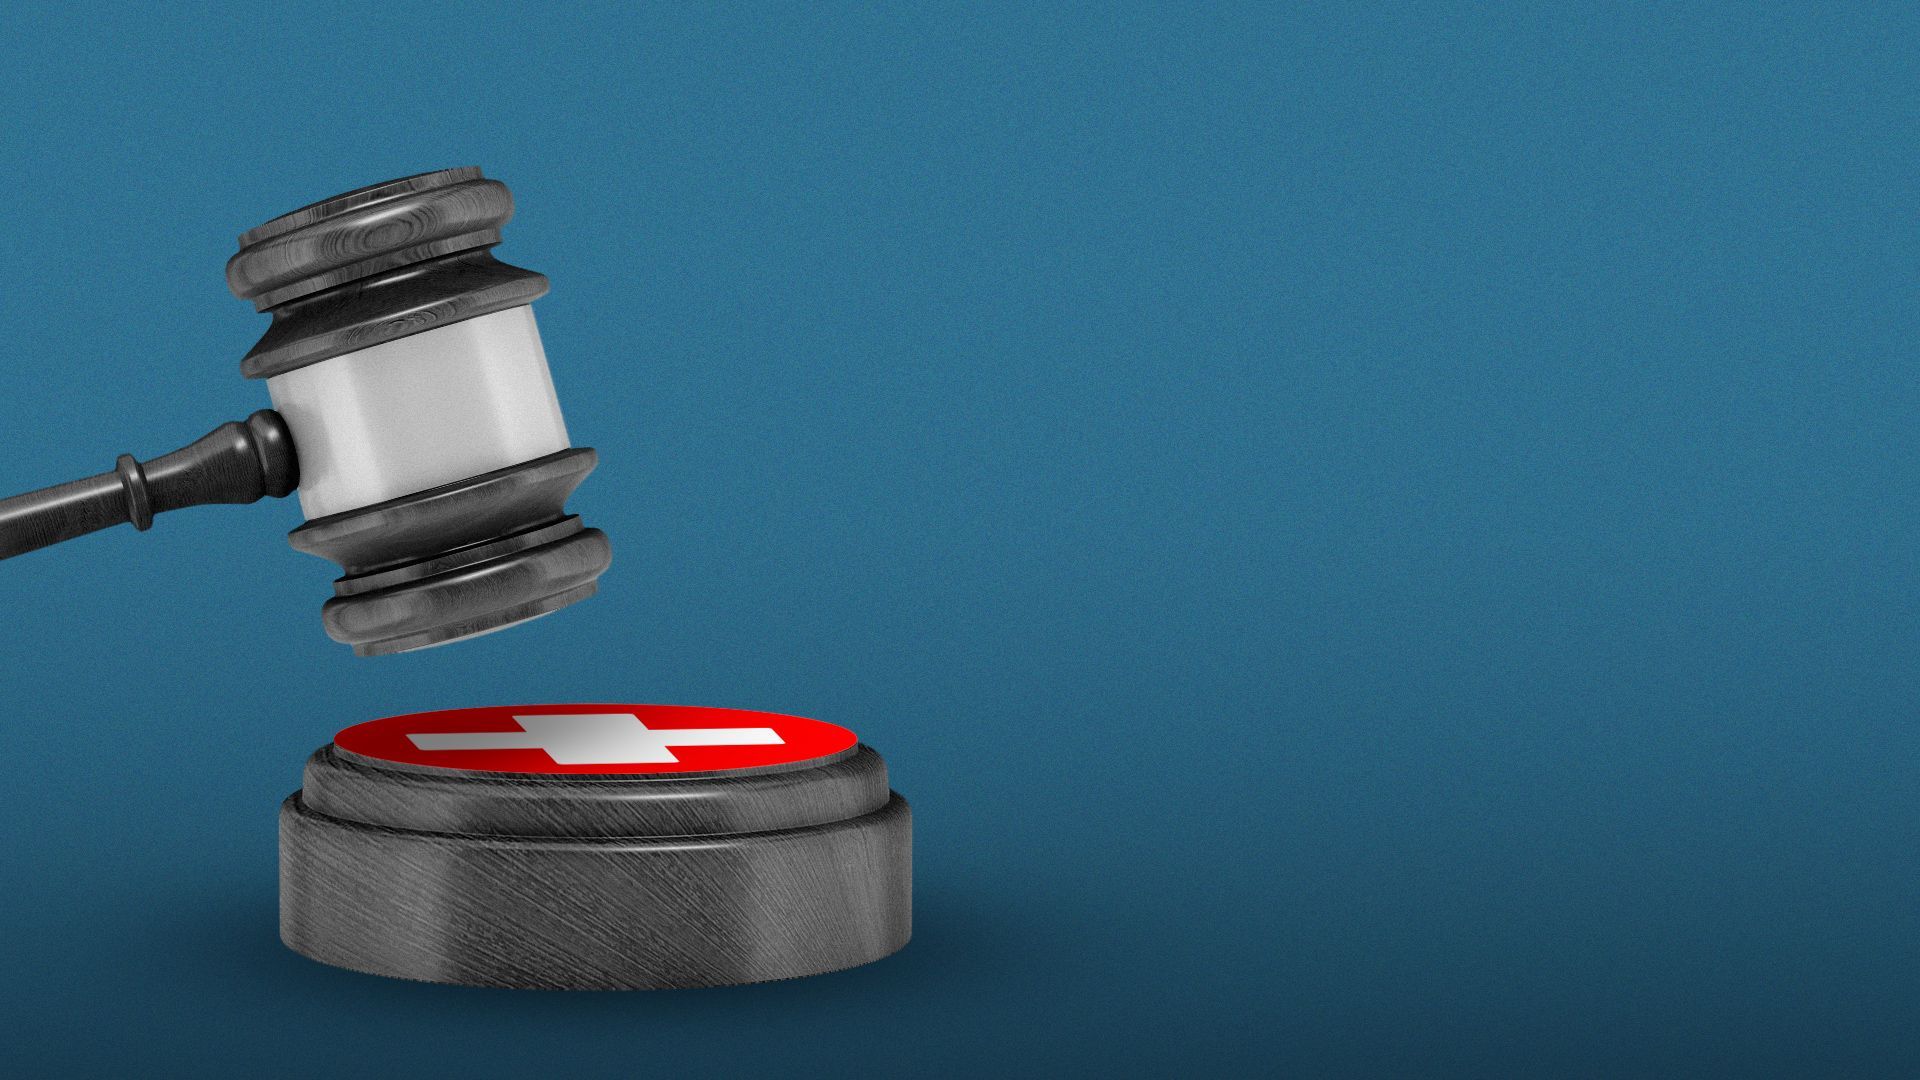 Illustration of a gavel hovering over a block with an image of a red cross.